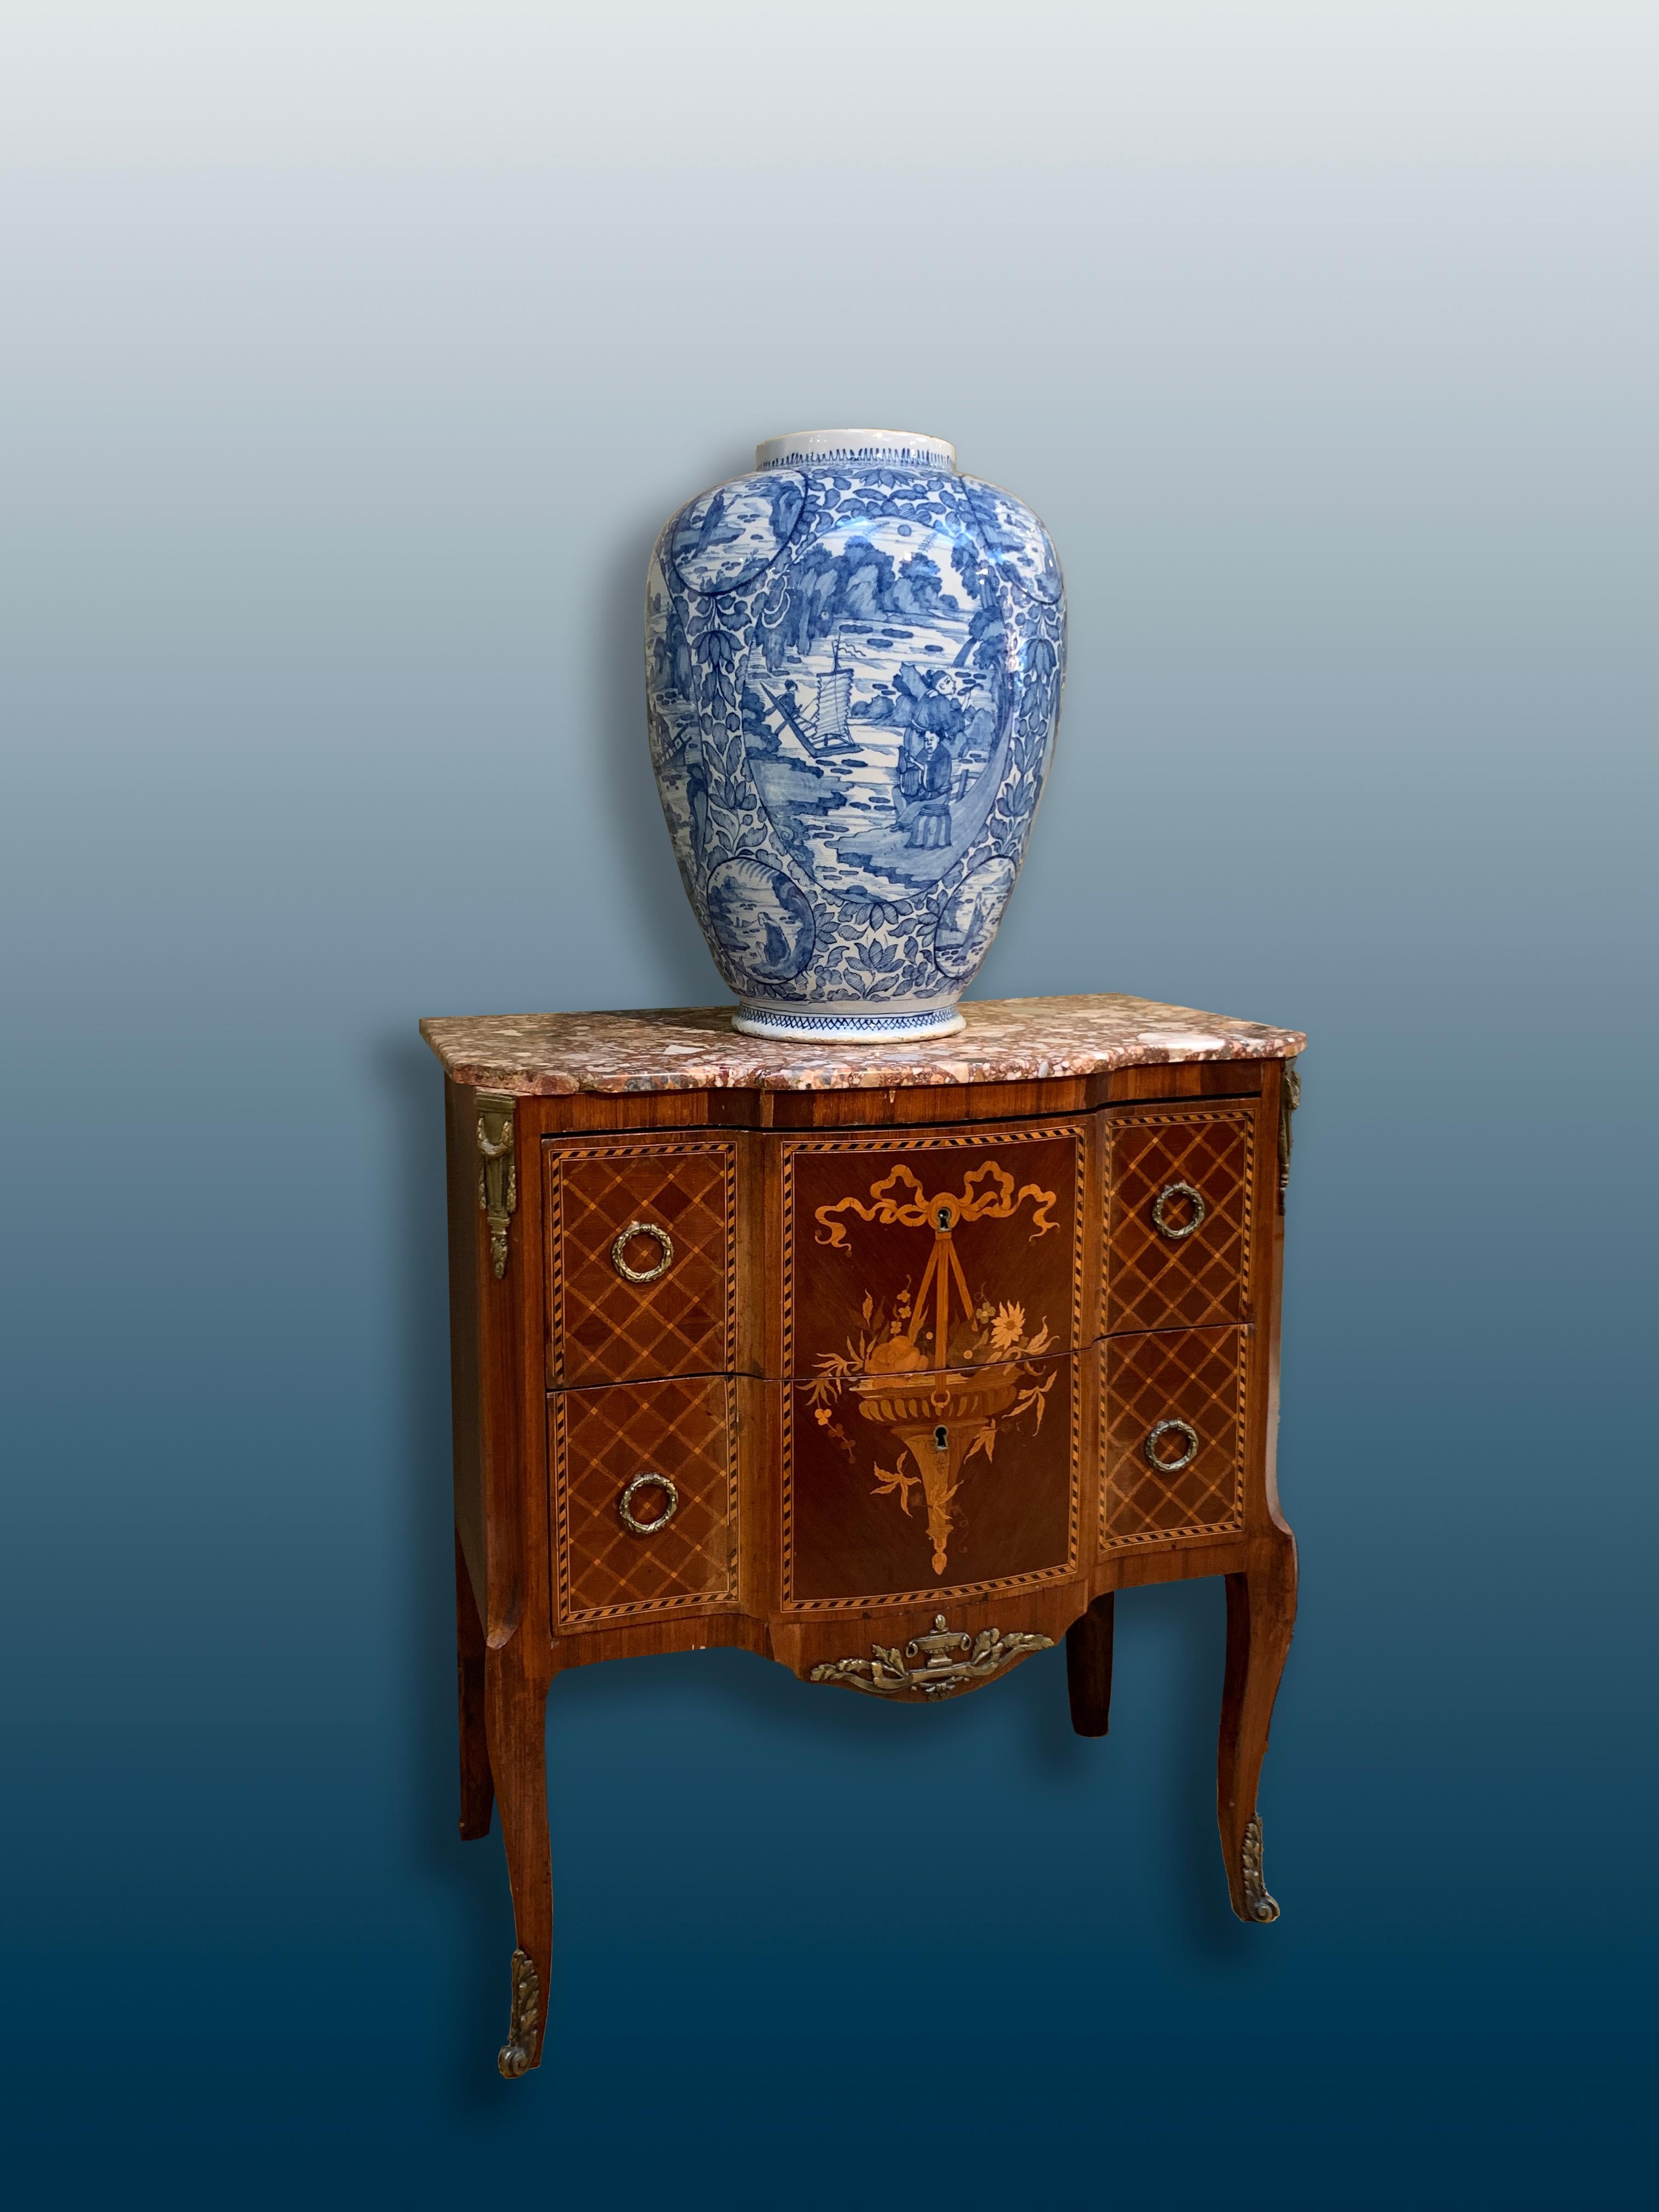 Very Large Blue and White Dutch Delft Vase in Chinoiserie, Early 18th Century For Sale 5